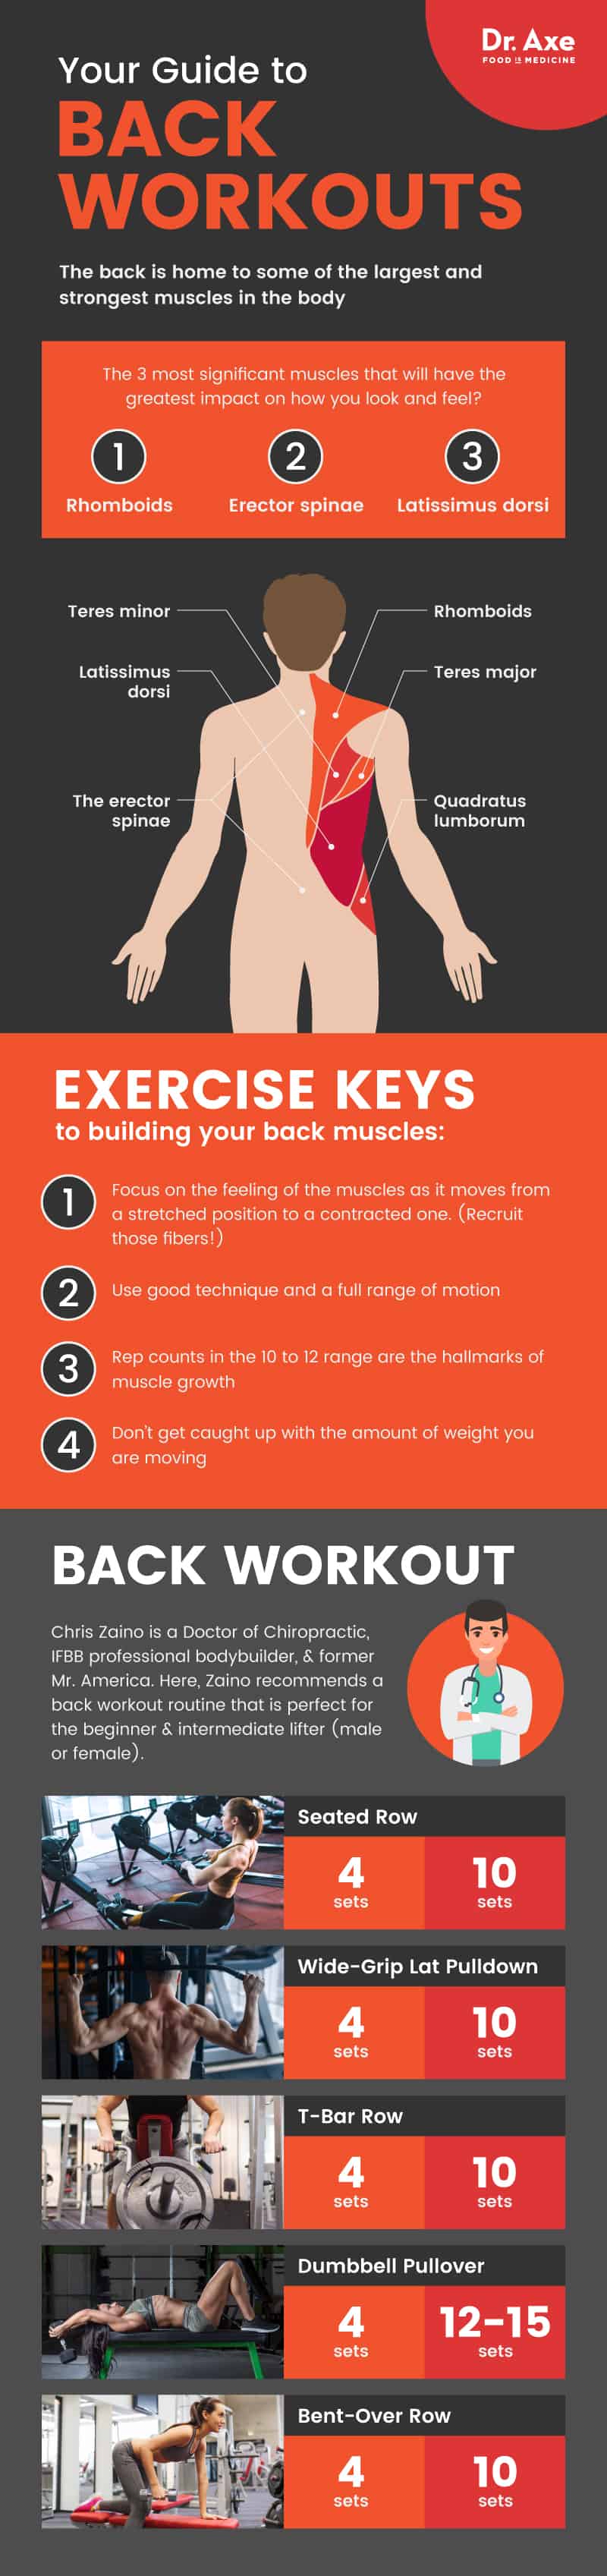 Back workouts guide - Dr. Axe